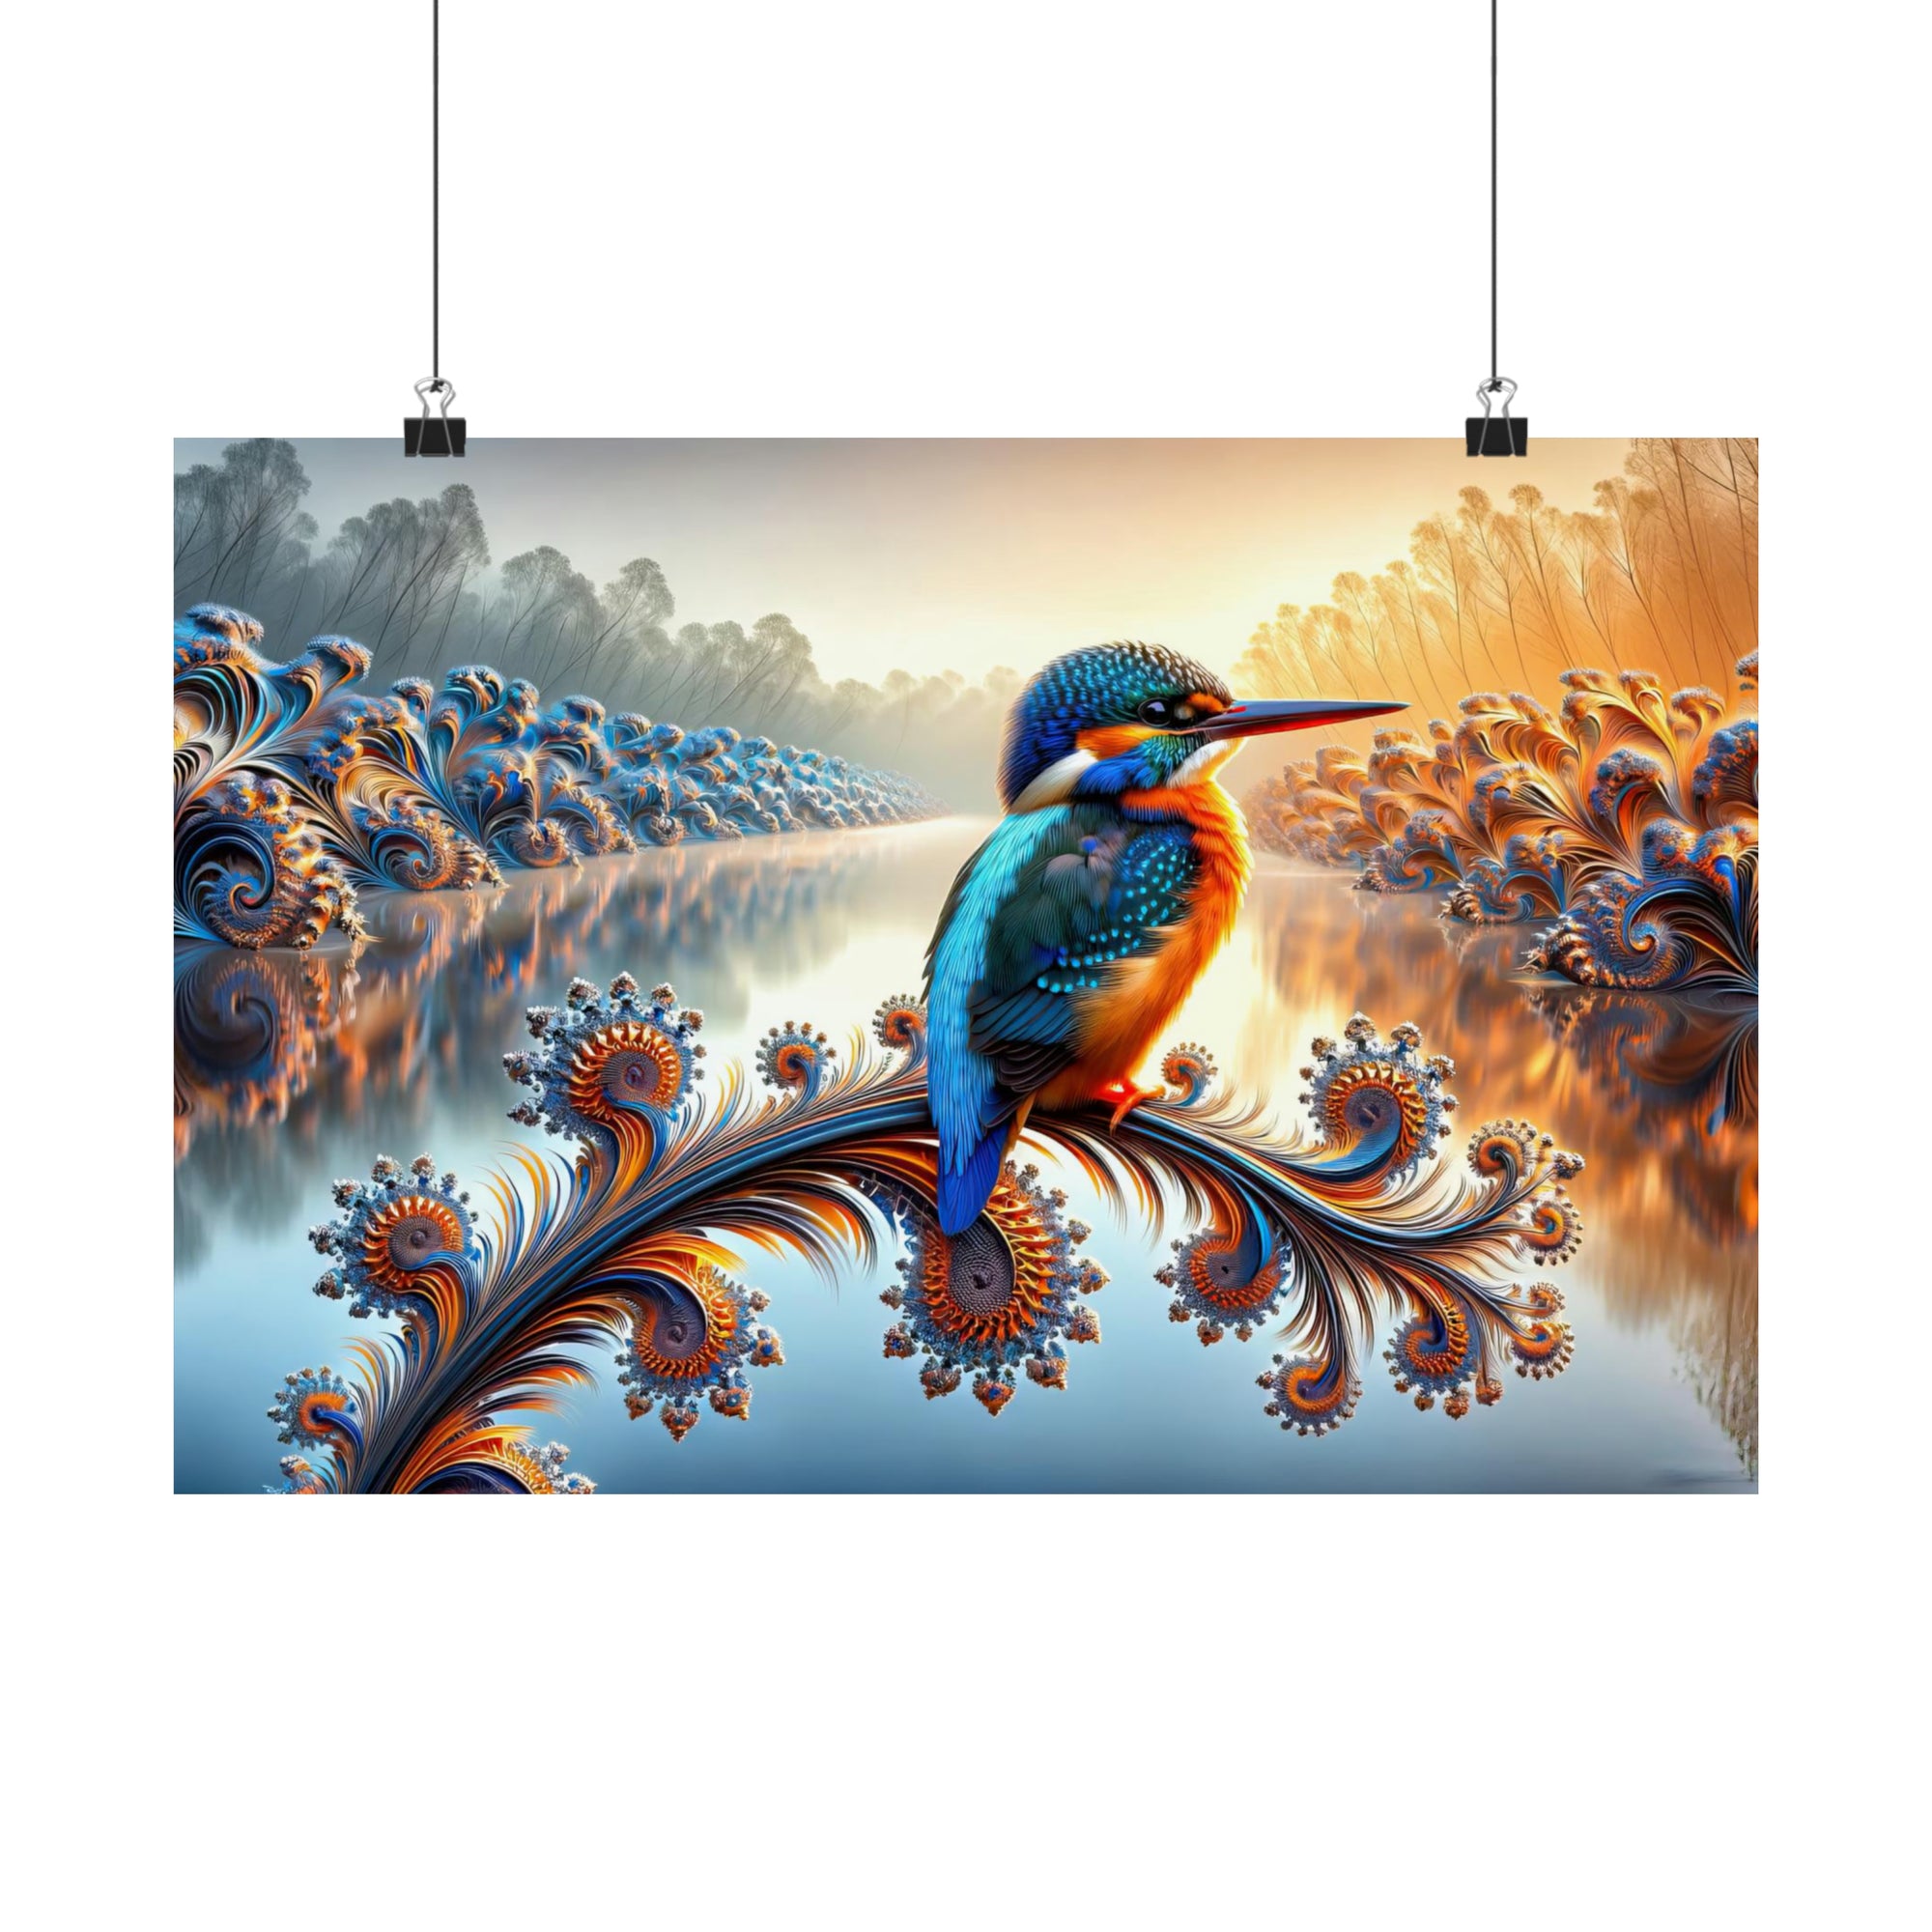 The Kingfisher's Perch Poster